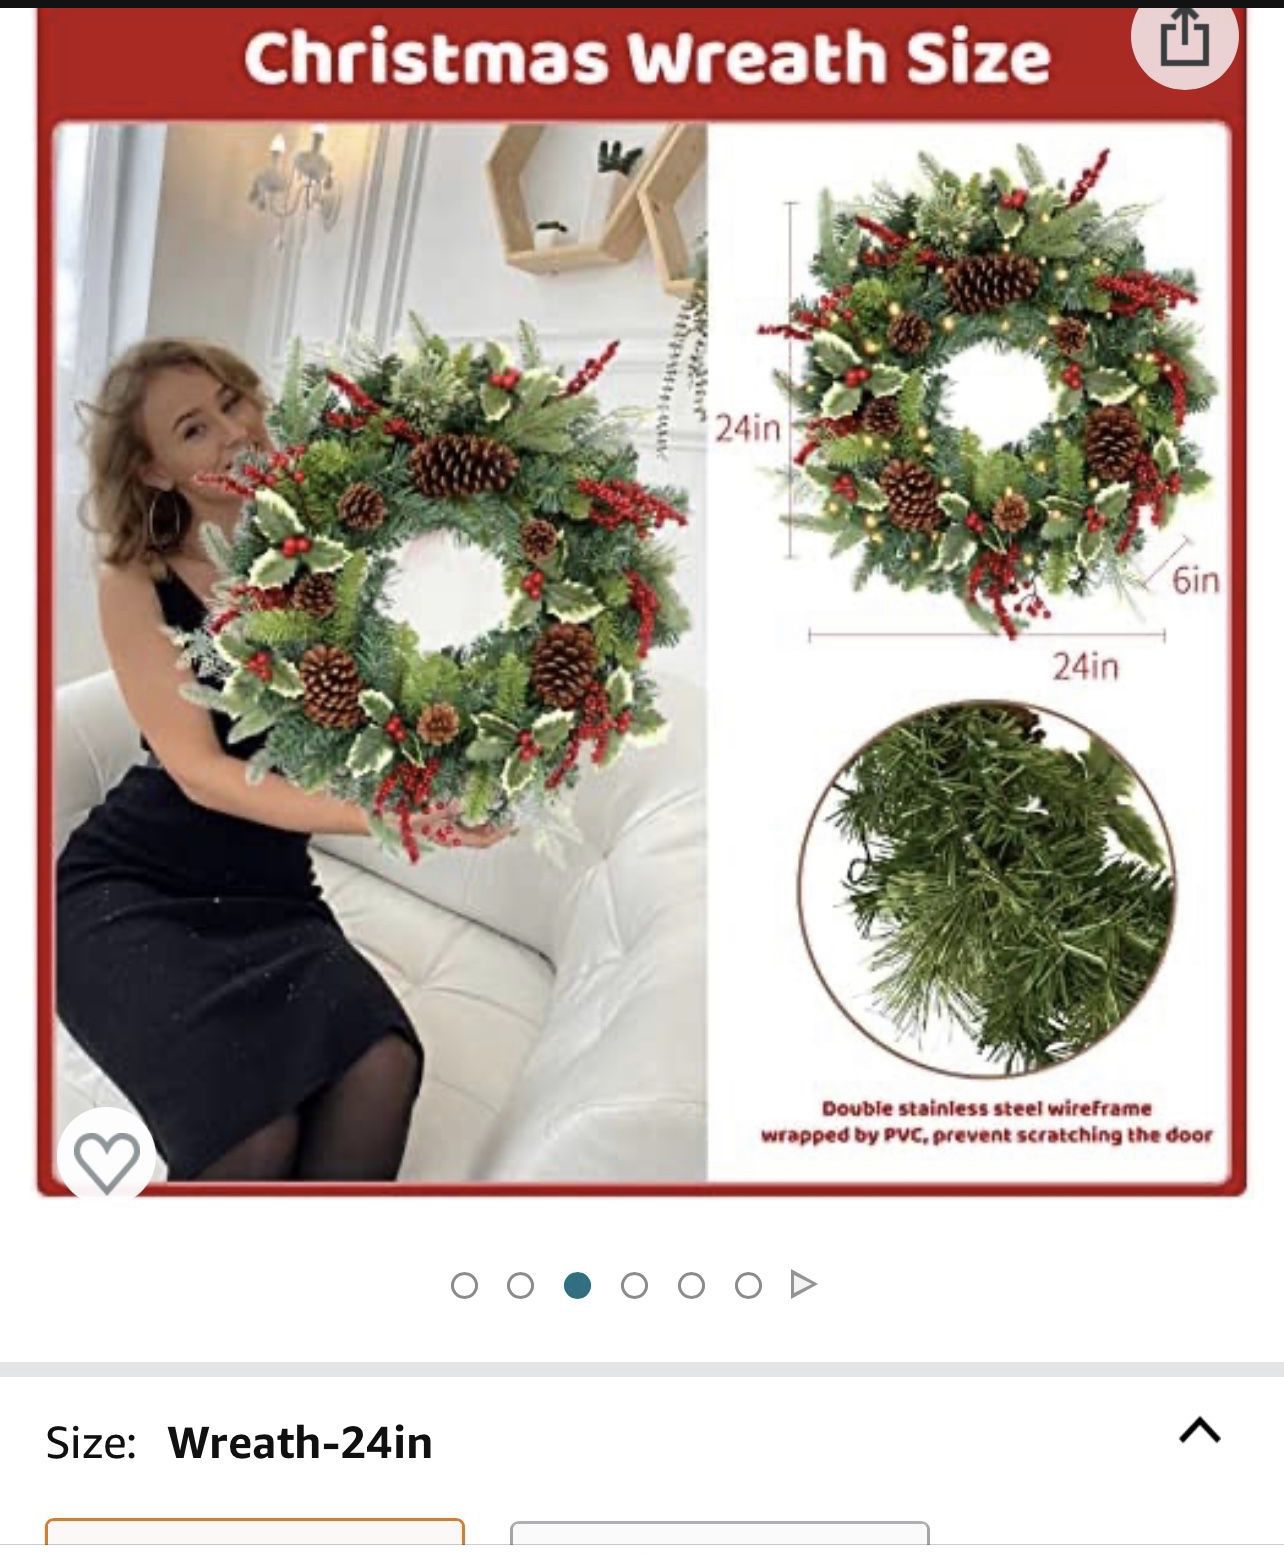 24 Inch Pre-Lit Large Outdoor Wreath with 50 LED Lights